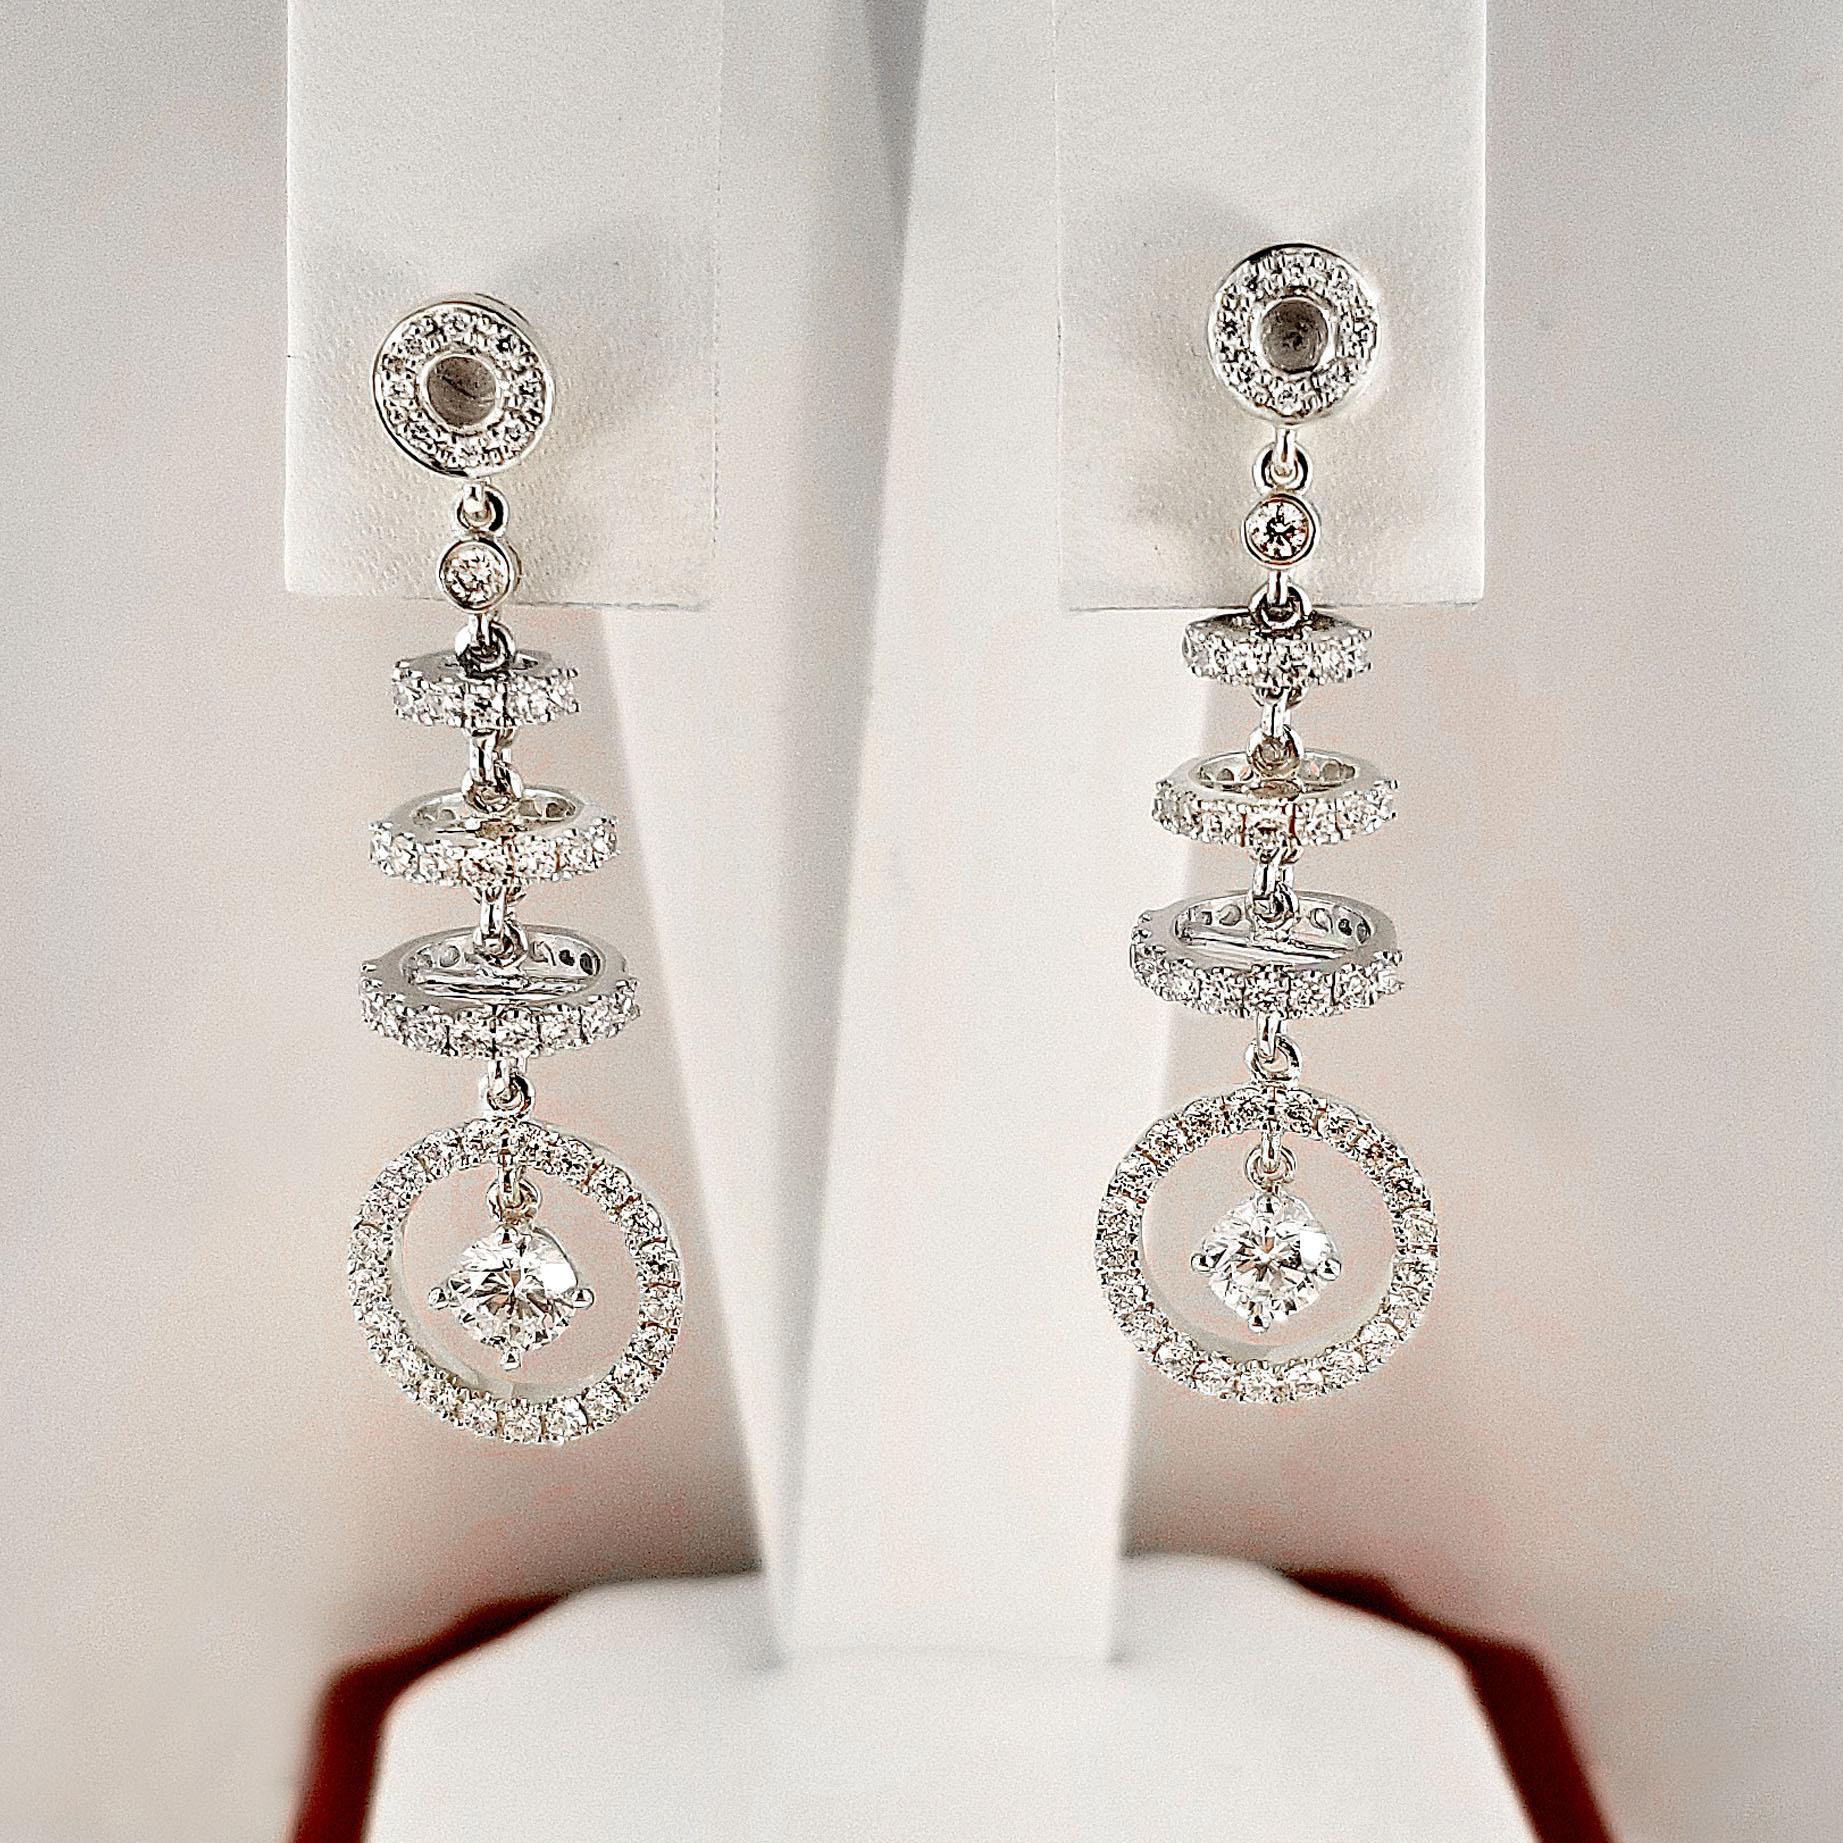 Vitolo 18 Karat Gold Diamond Rondel Drop Earrings In New Condition For Sale In Los Angeles, CA